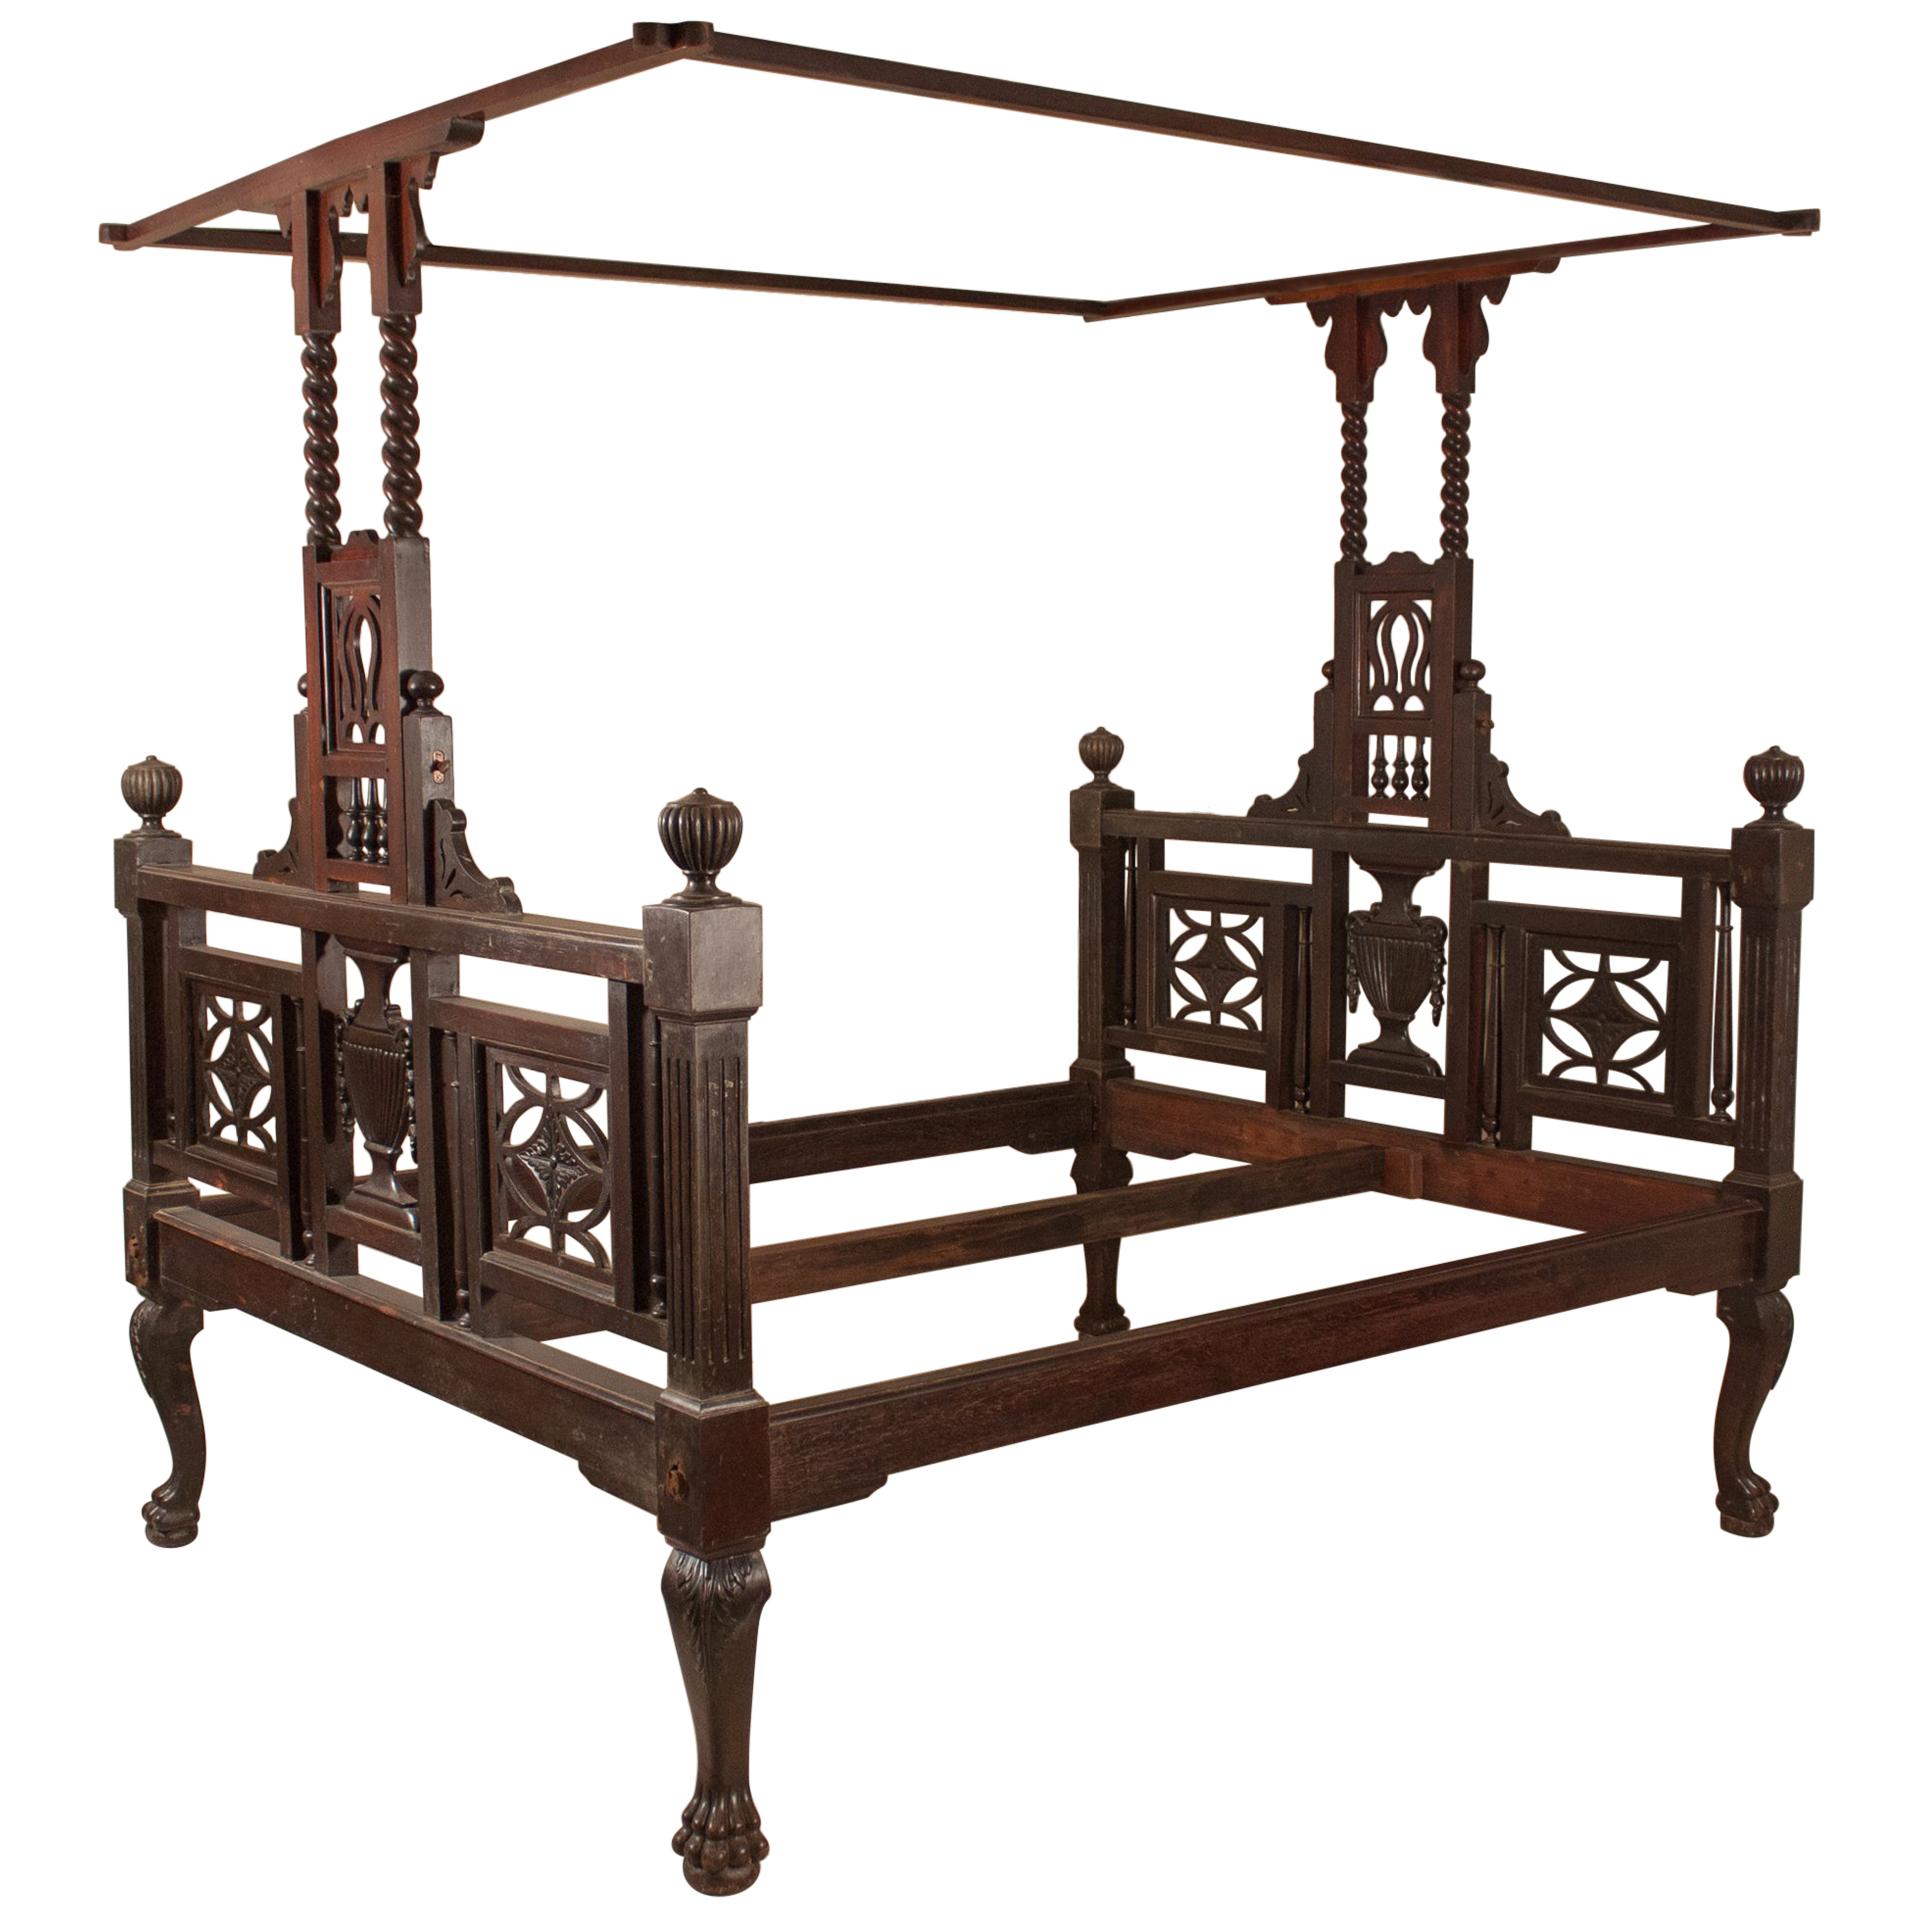 Early 20th Century Mahogany Canopy or Tester Bed from British India